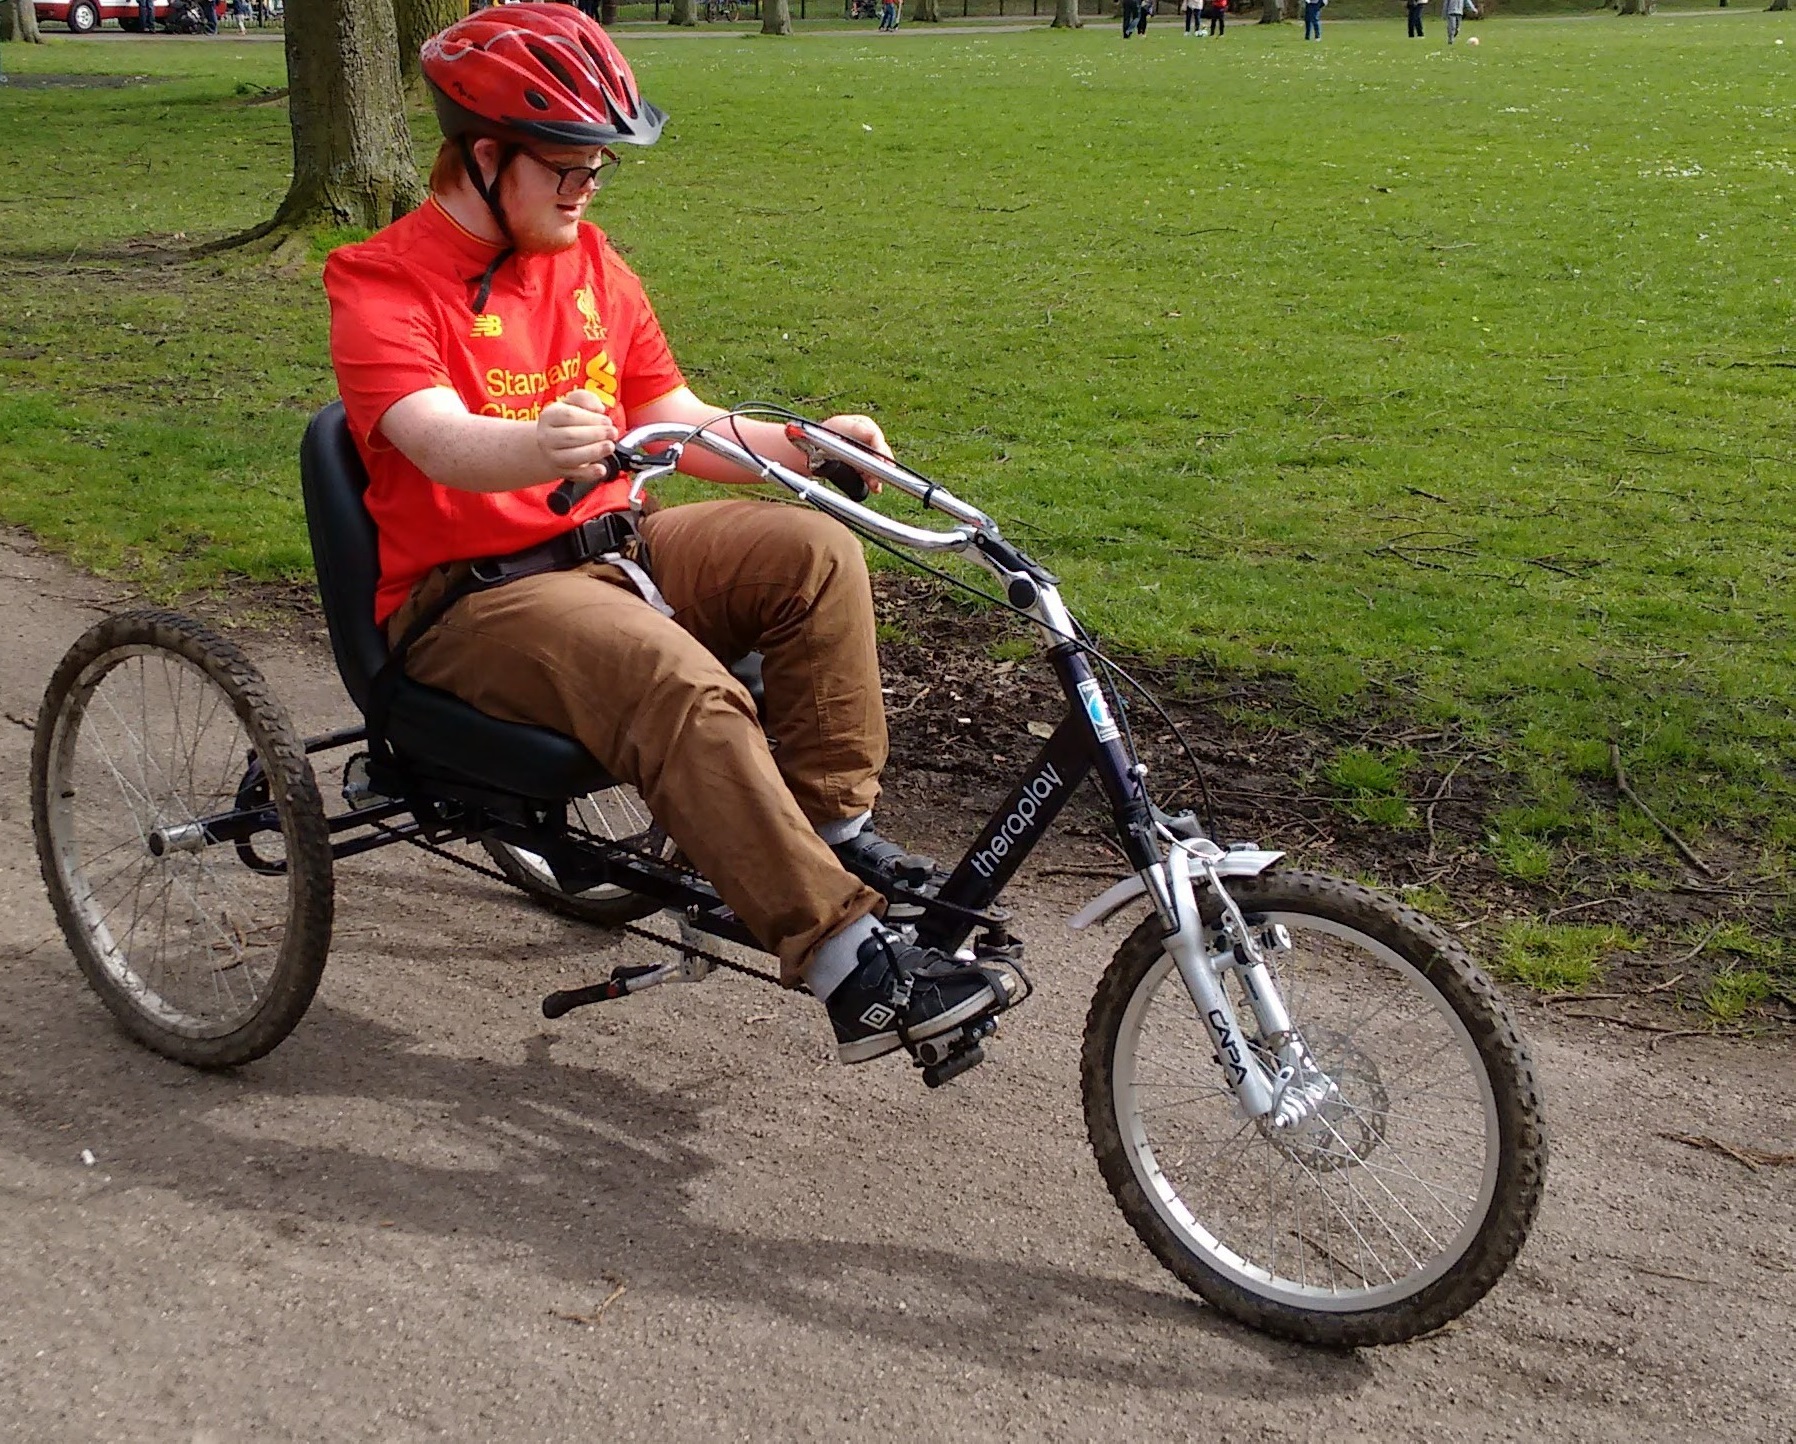 Man on adapted bike for disabled people or people recovering from injury